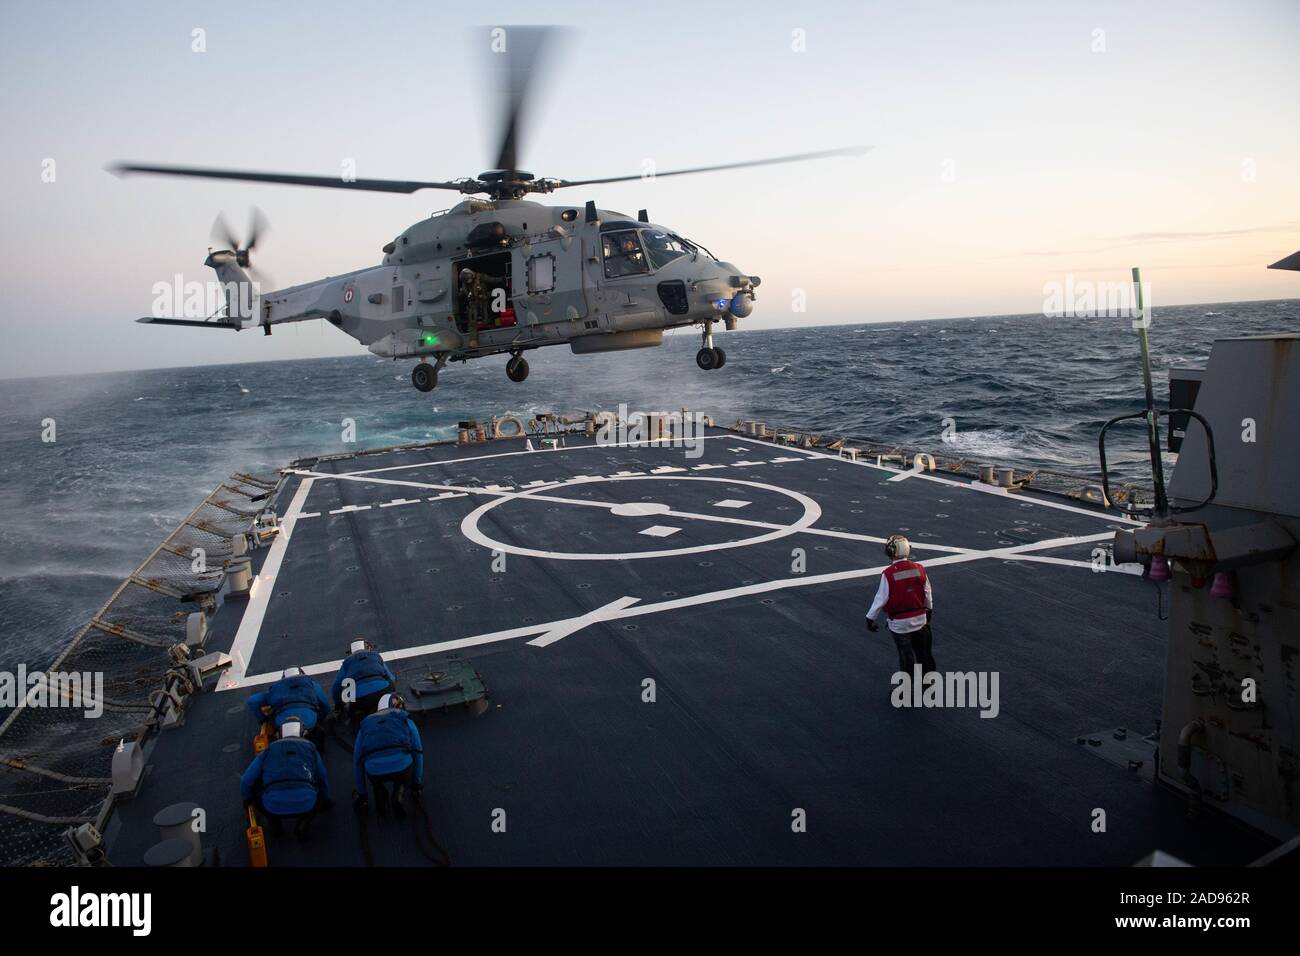 191129-N-CJ510-0276 MEDITERRANEAN SEA (Nov. 29, 2019) – A French helicopter prepares to land on the flight deck of the Arleigh Burke-class guided-missile destroyer USS Ross (DDG 71) during exercise PEAN 19 Nov. 29, 2019. Exercise PEAN 19 is a French-led exercise designed to enhance the operational capability of the French carrier strike group, Charles de Gaulle, while providing realistic training to both the French and participating nations while strengthening interoperability and relationships. (U.S. Navy photo by Mass Communication Specialist 3rd Class Andrea Rumple/Released) Stock Photo